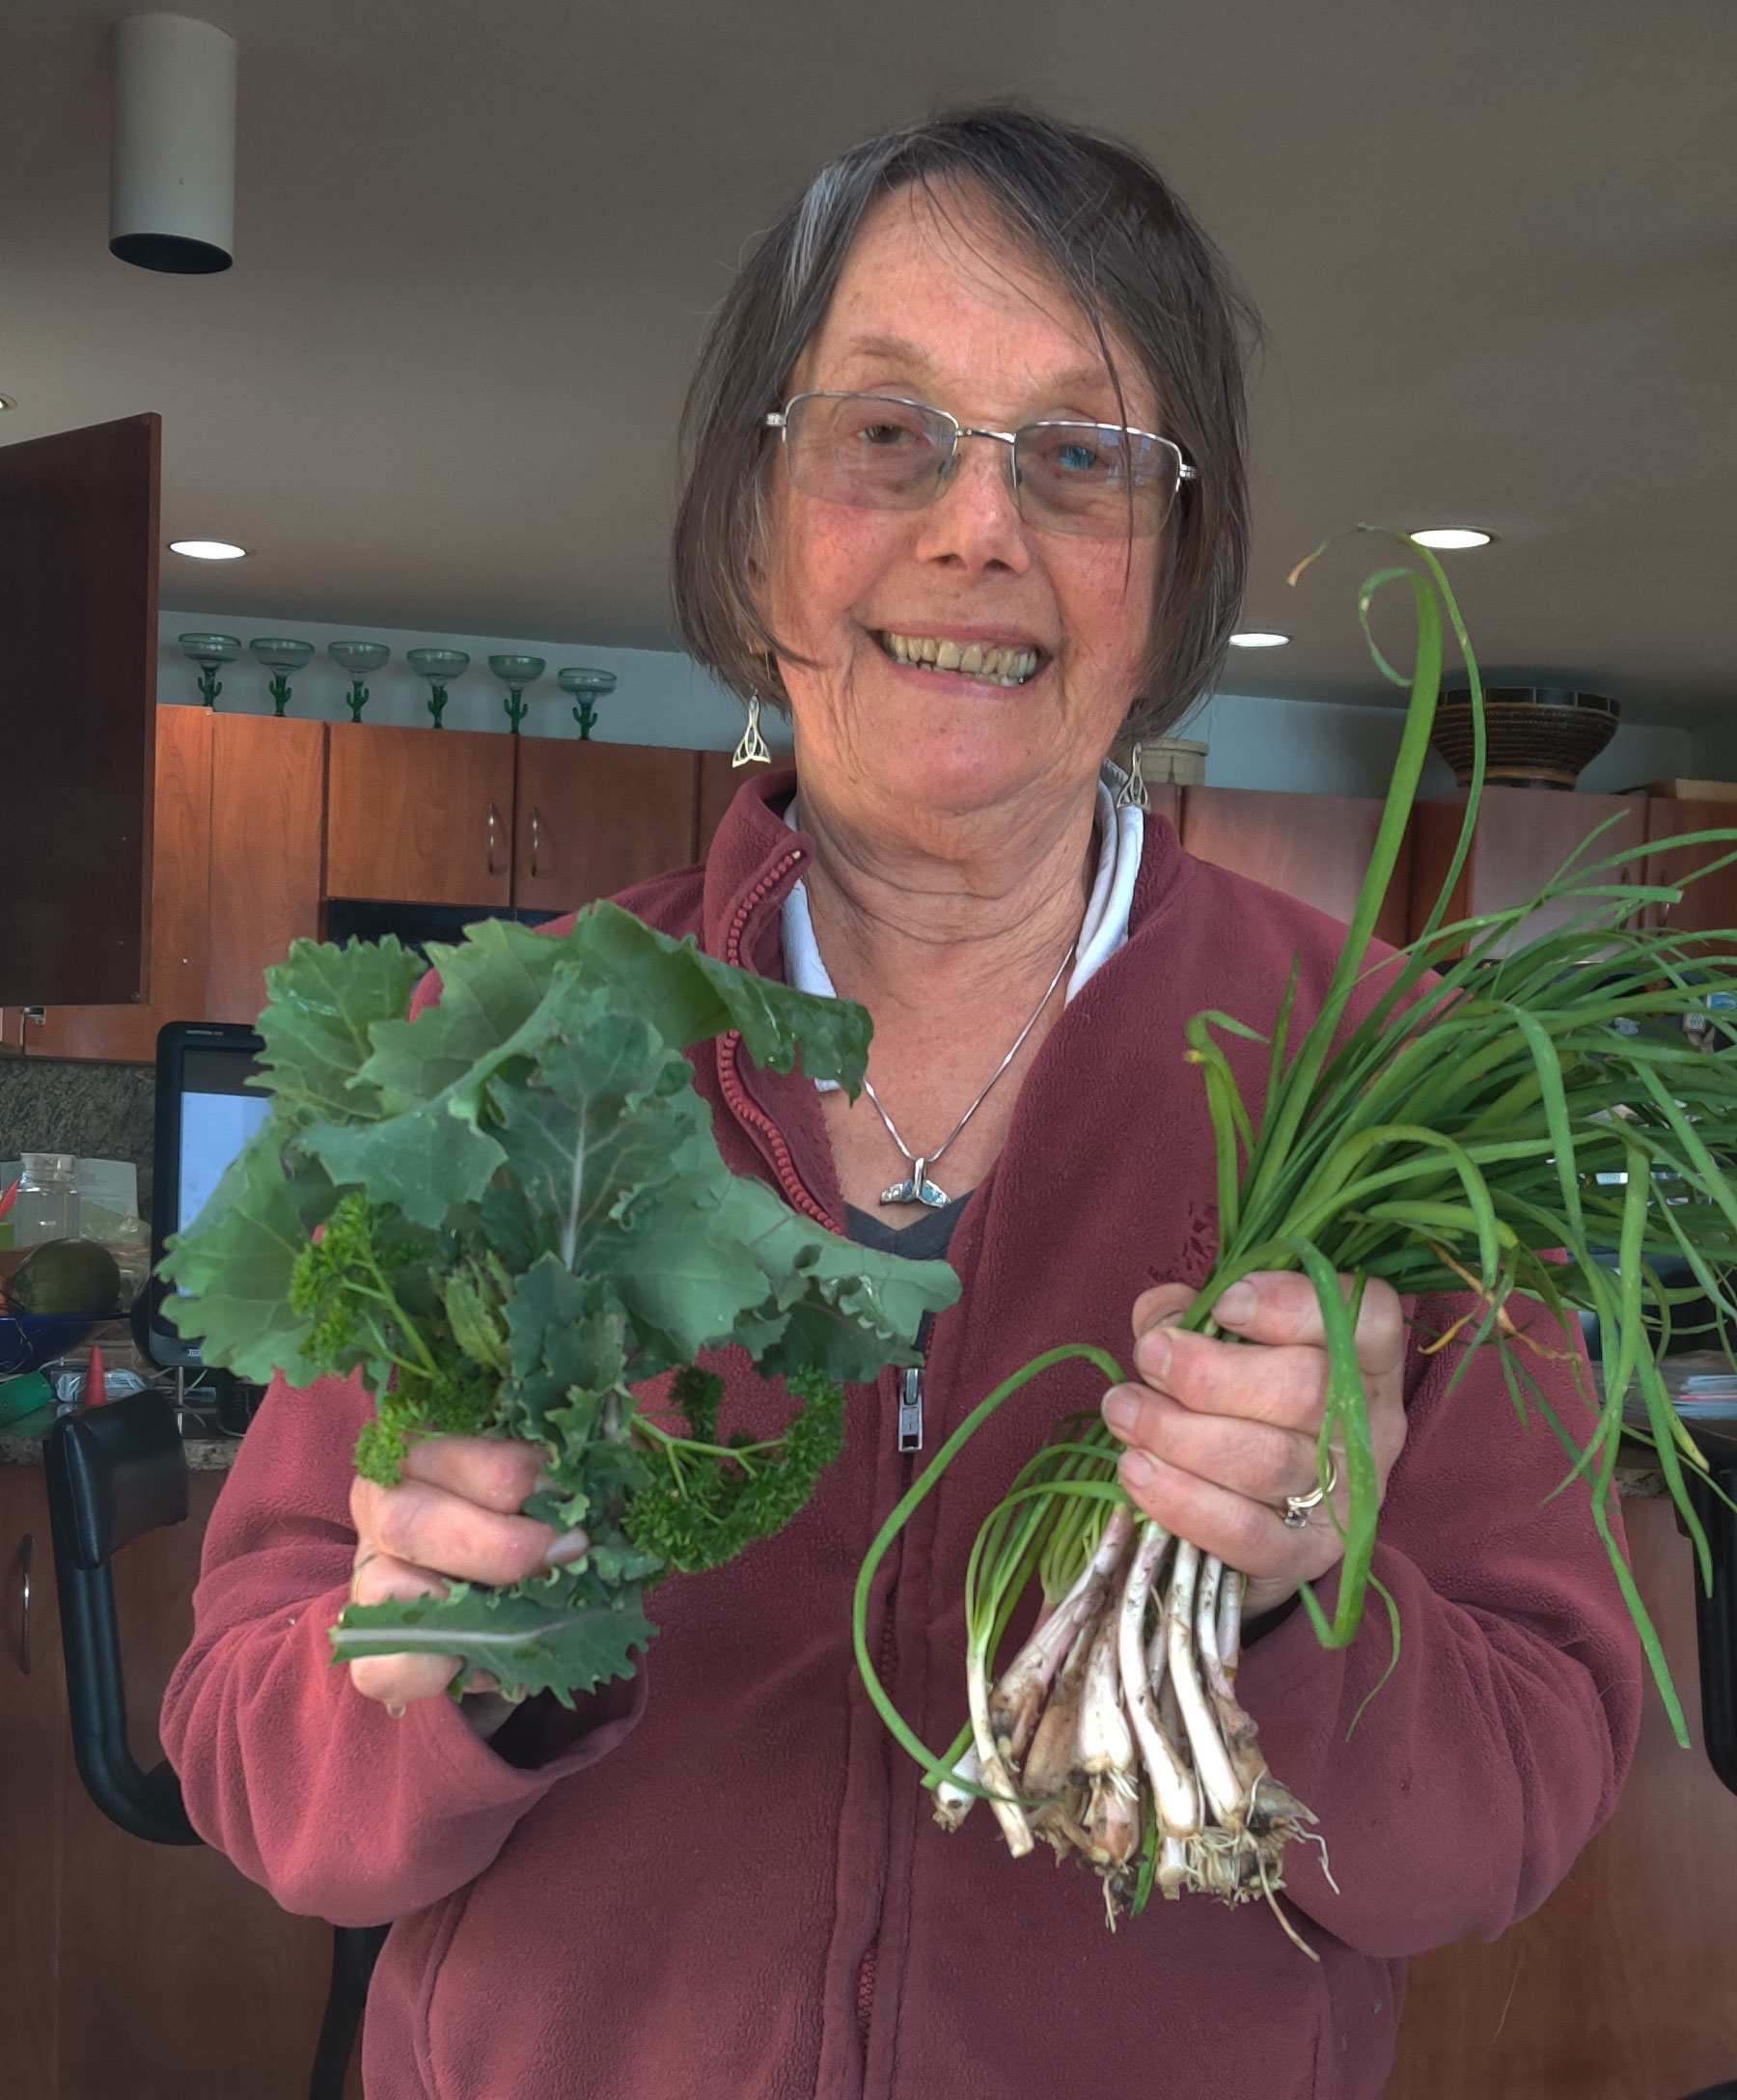 Jean smiling and holding onions and kale from her garden.